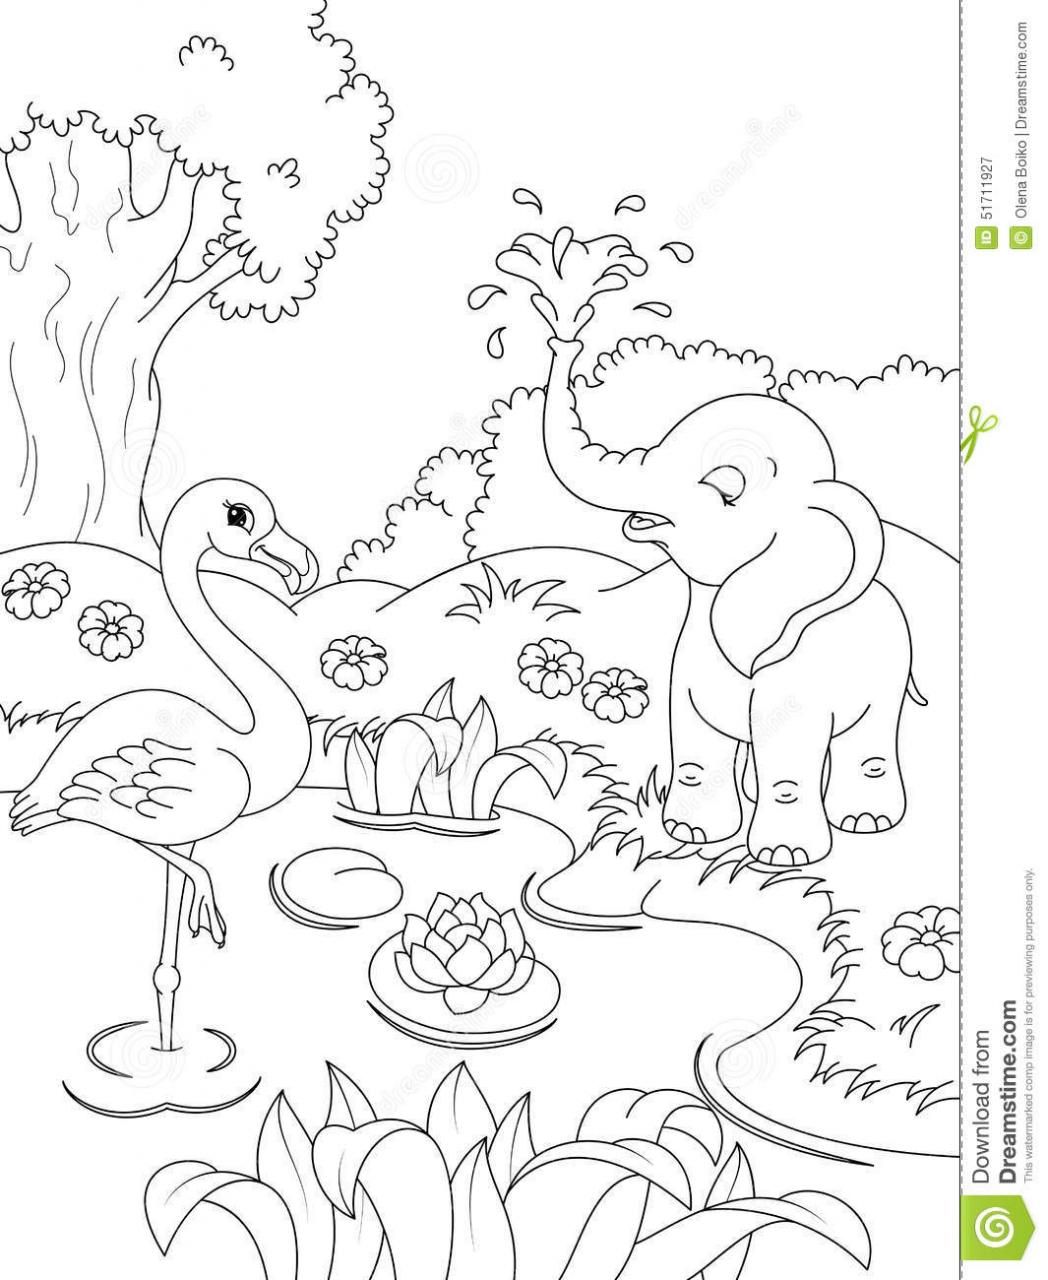 Nature Scenes Coloring Pages - Coloring Home